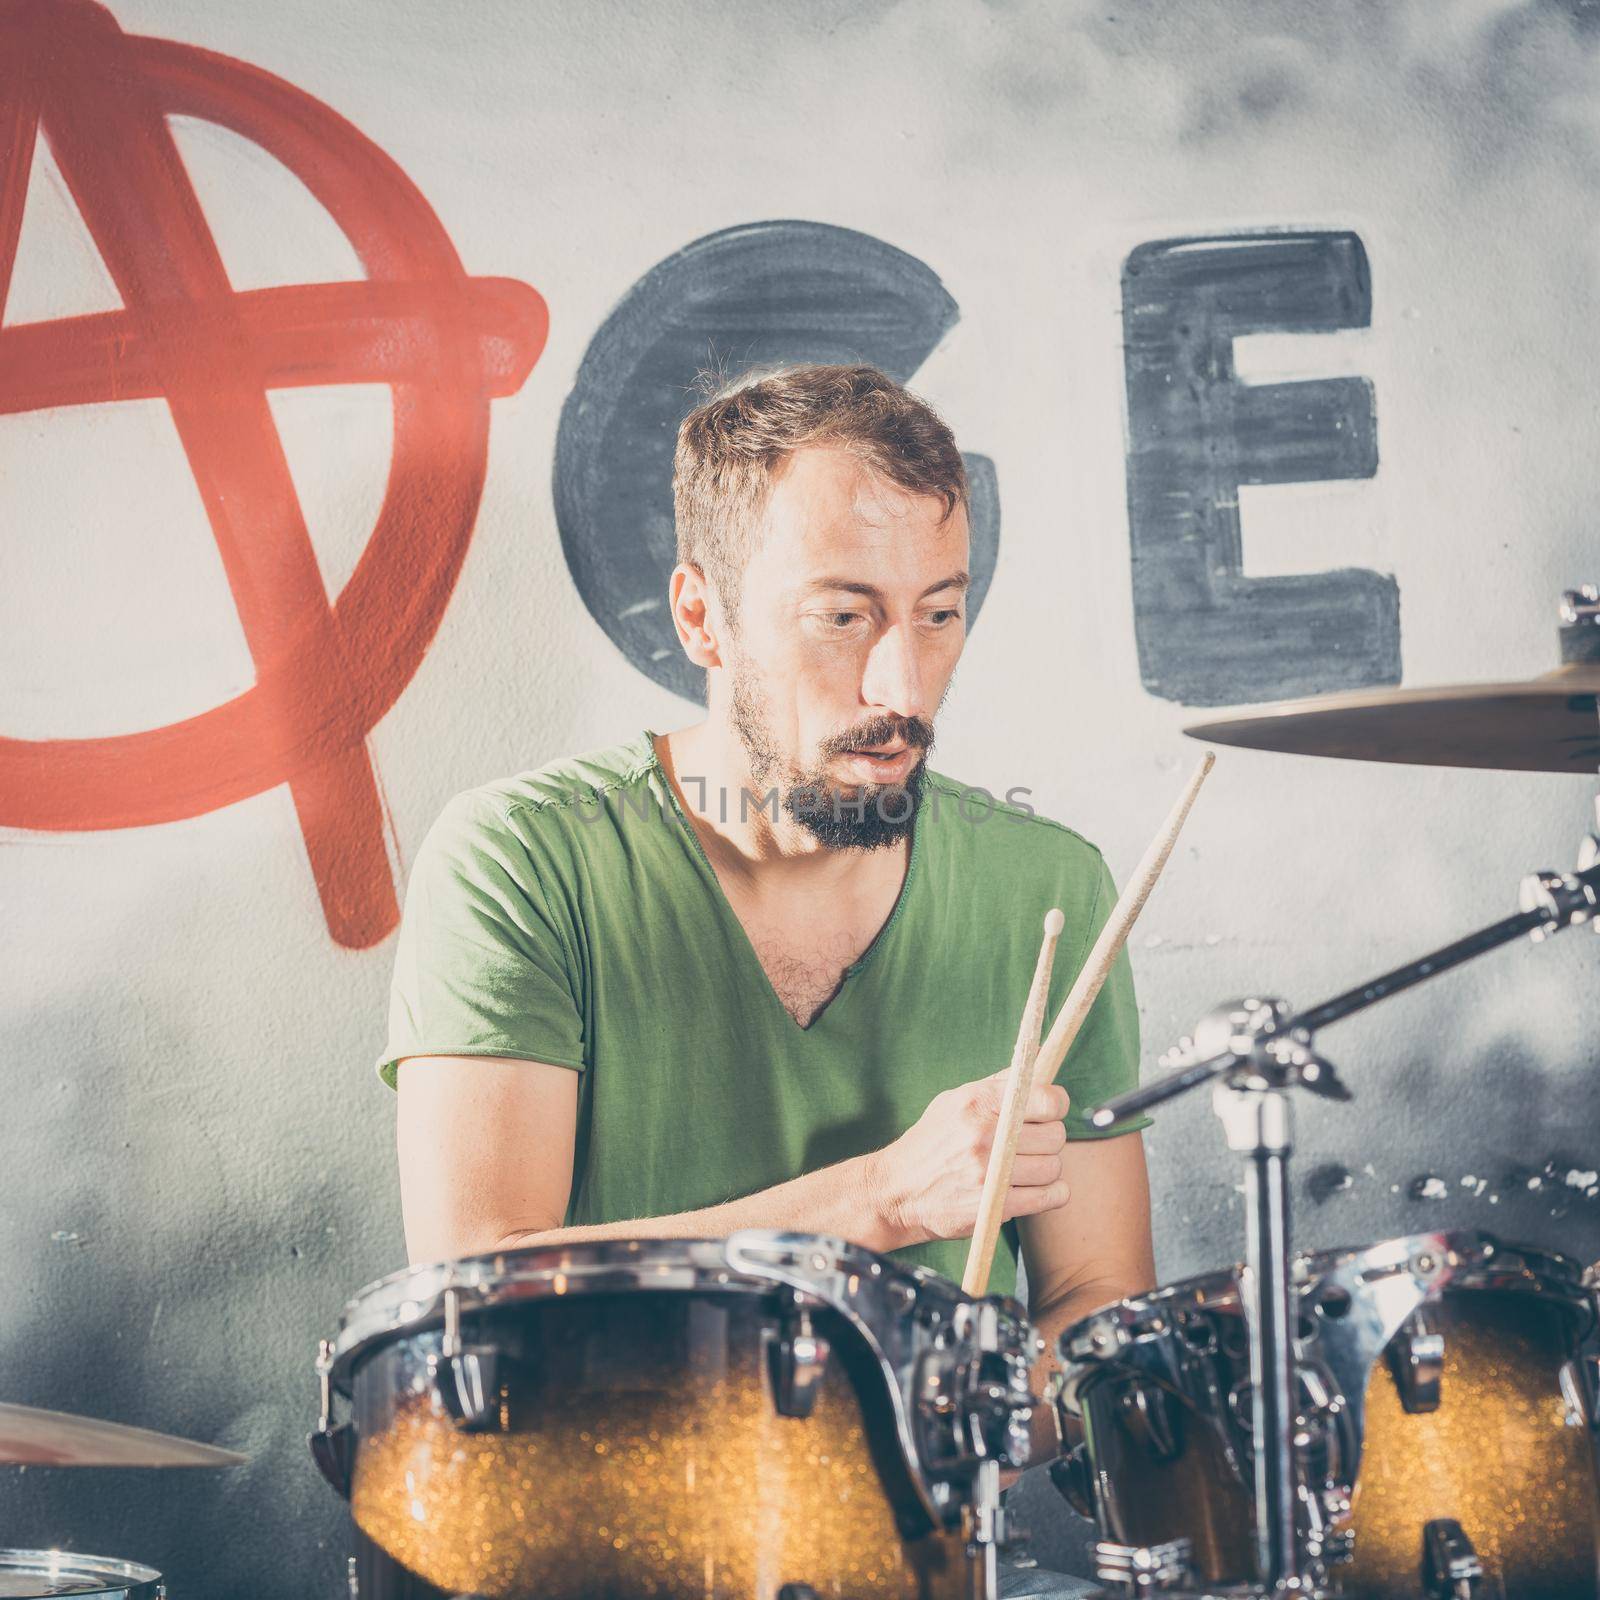 Musician playing the drums on stage by Kzenon